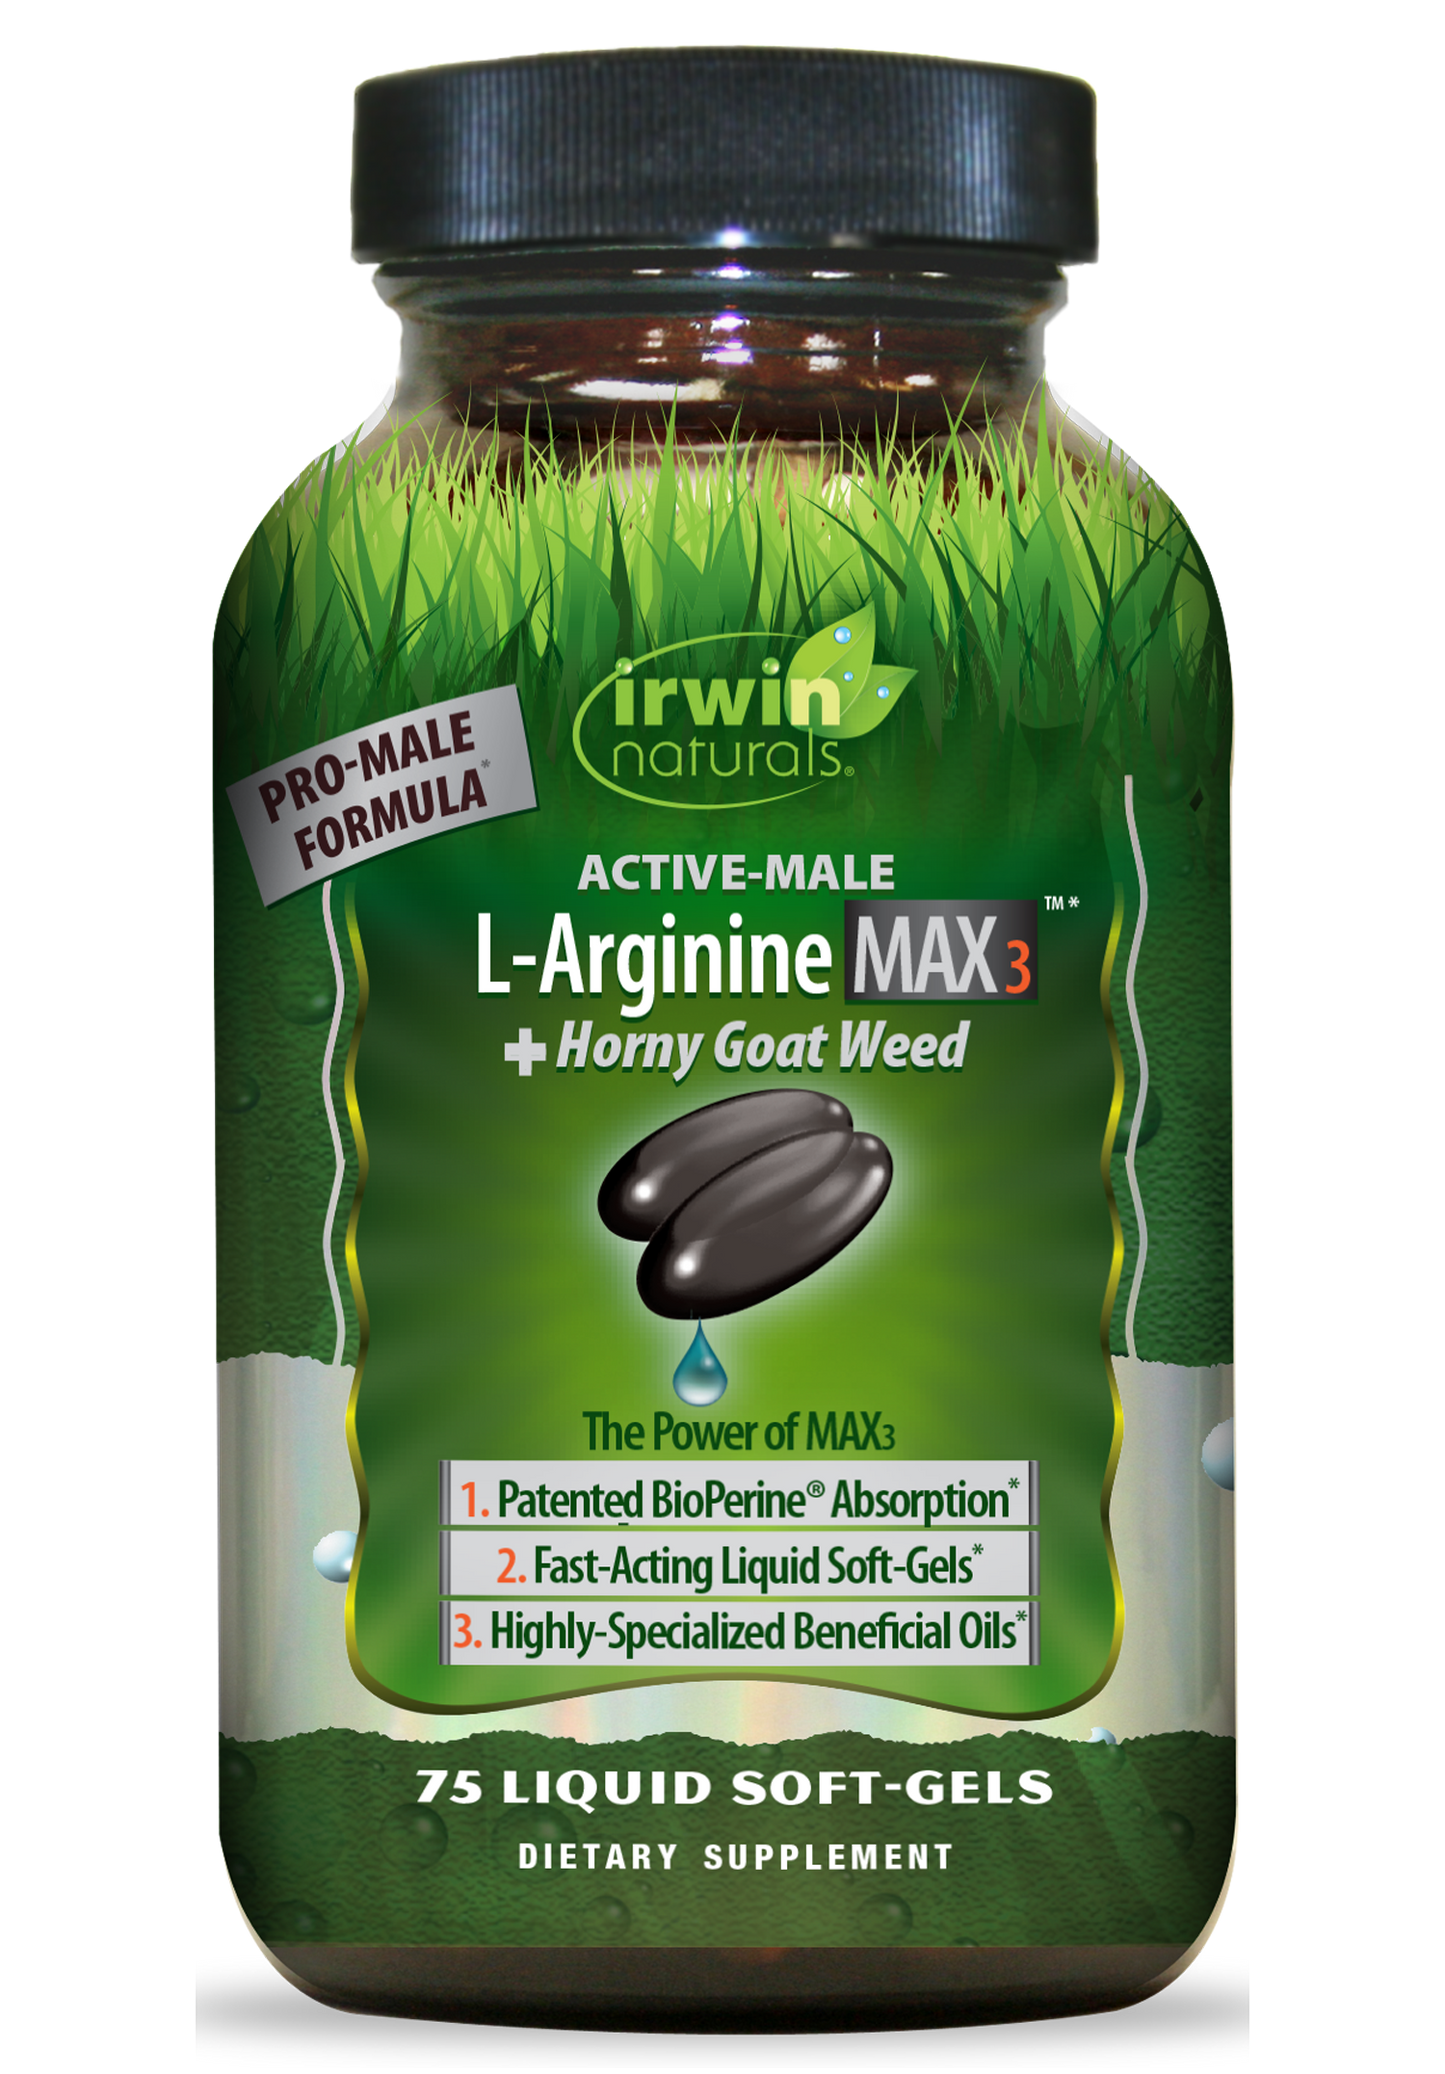 Active Male L-Arginine MAX3 + Horny Goat Weed